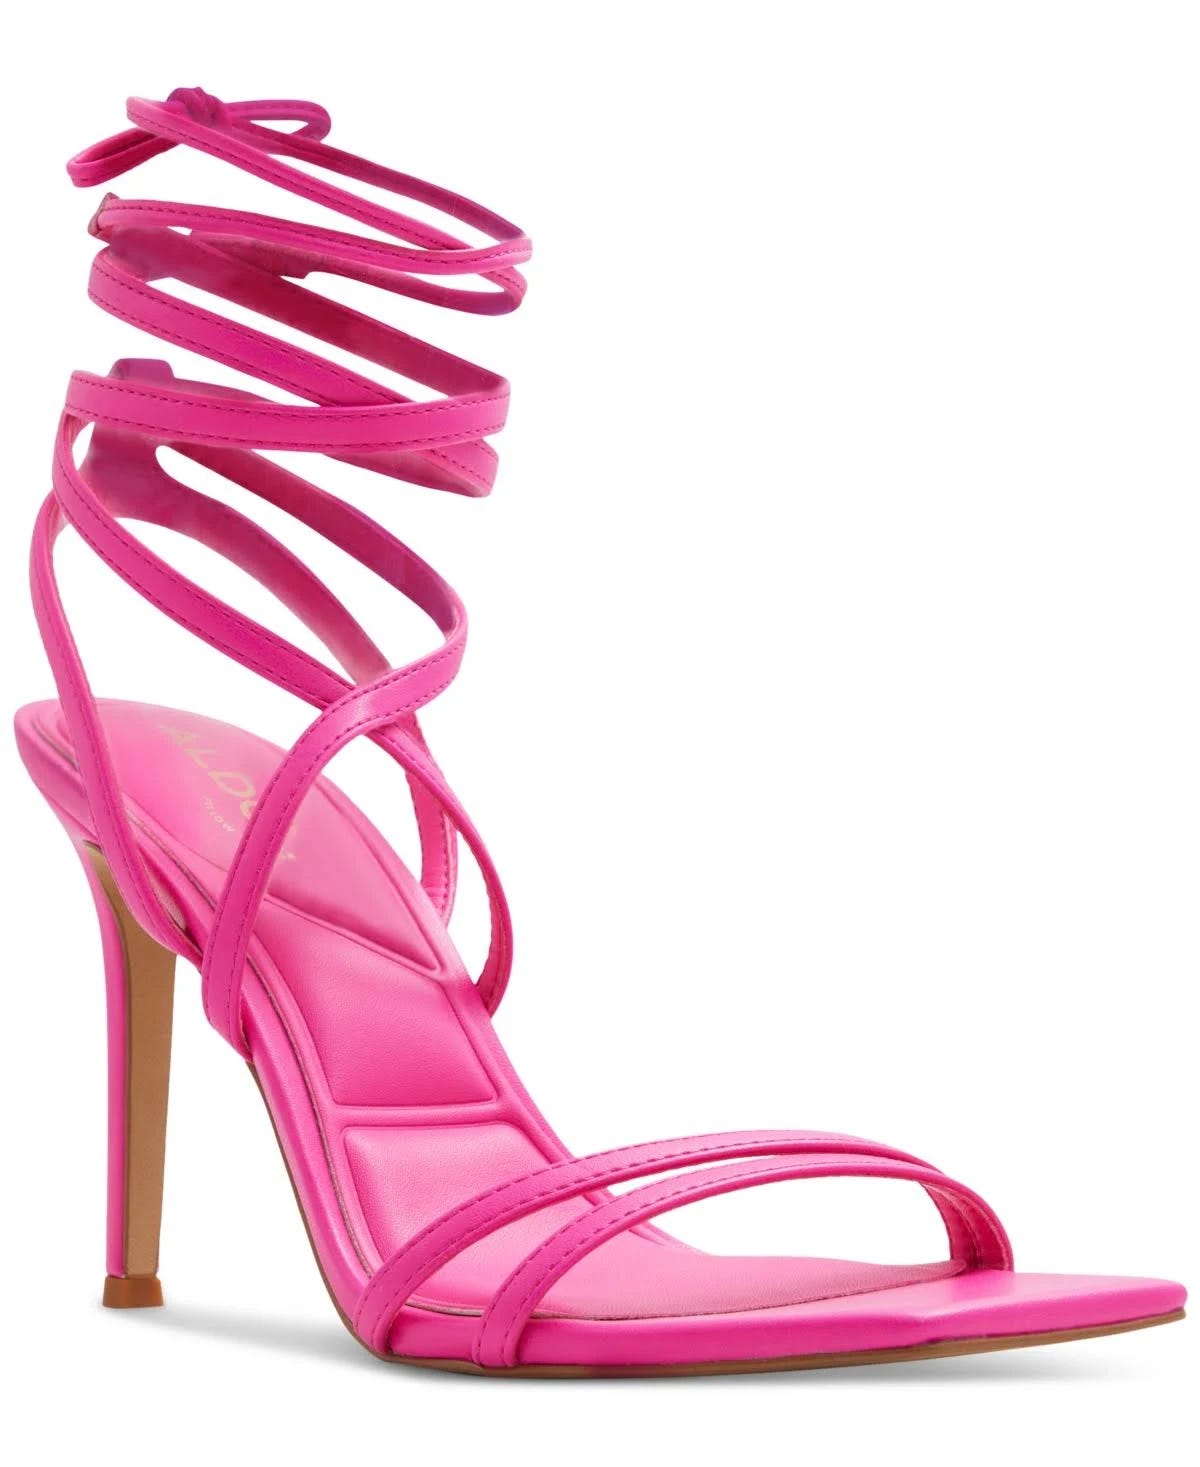 Bright Pink Stiletto Wrap Sandal with Pillow Walk Technology | Image